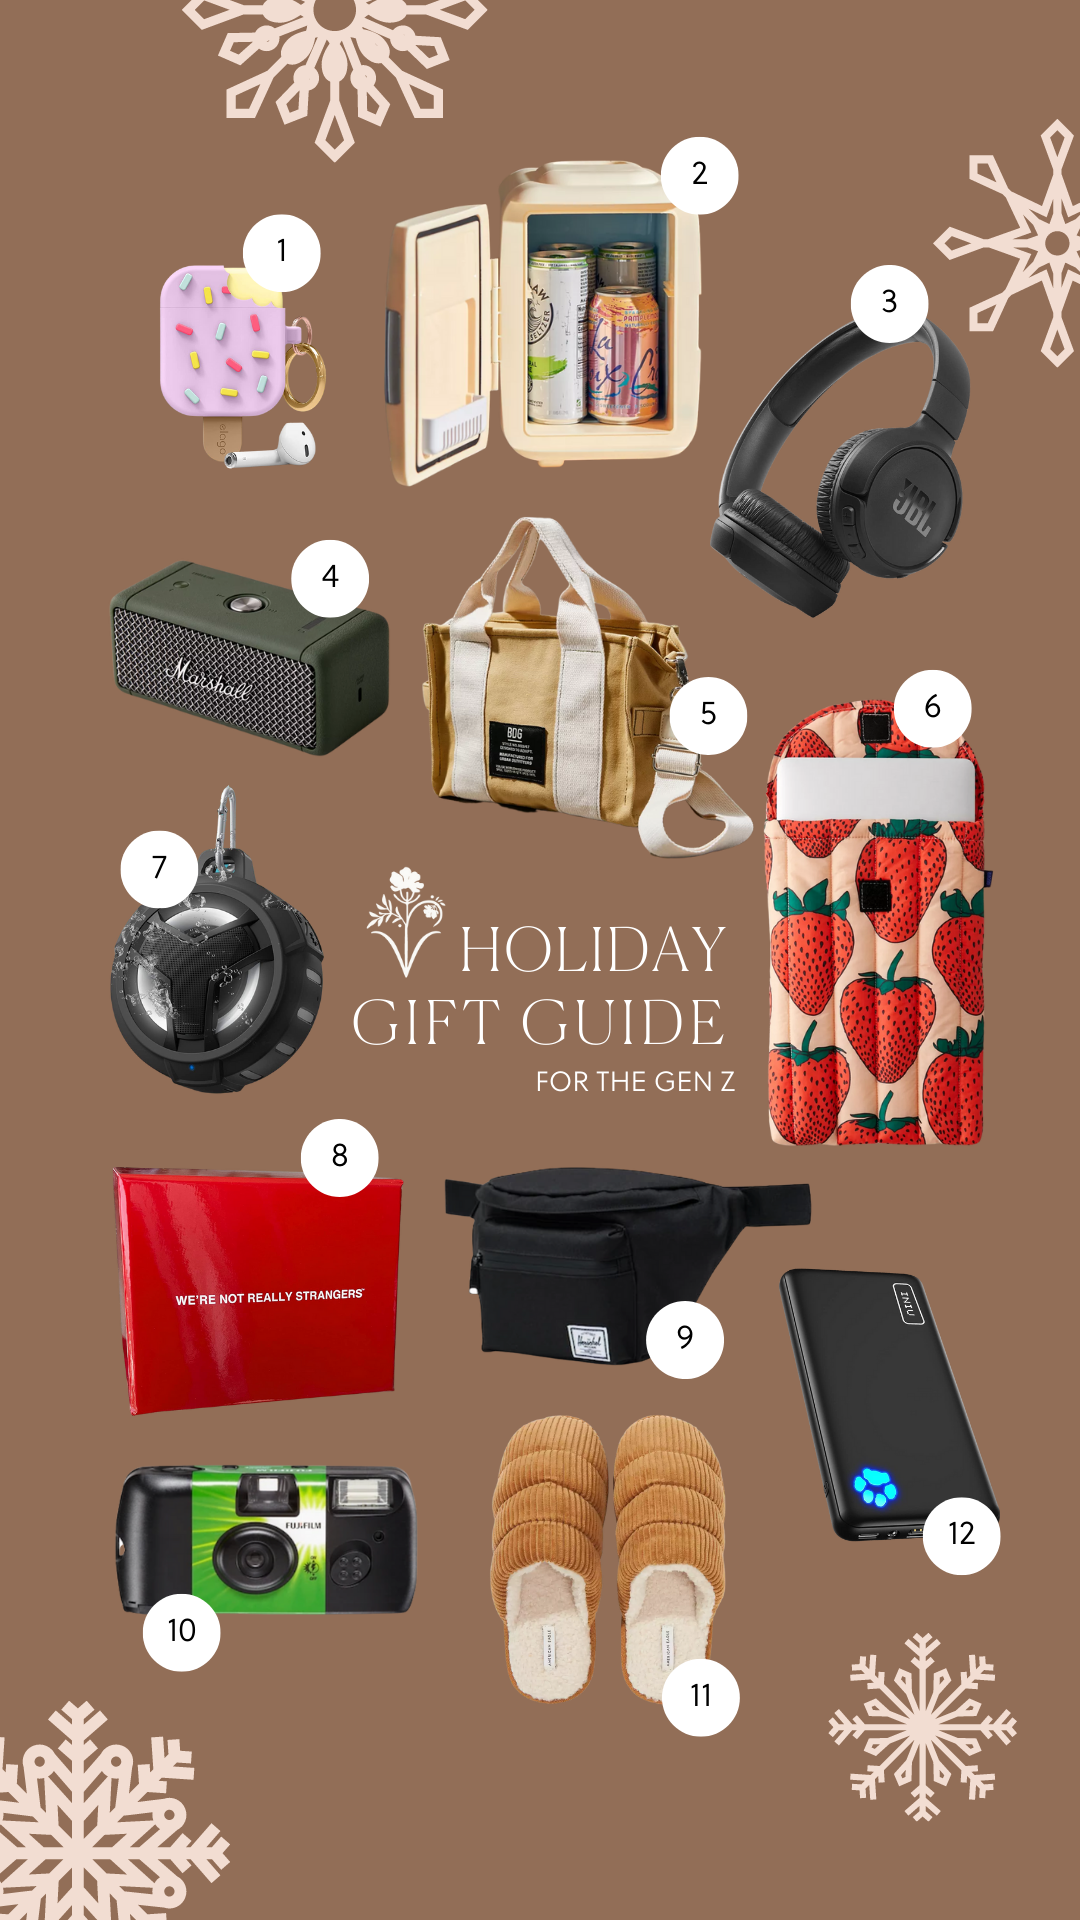 15 Generation Z Gift Ideas That Will Make You the Cool Mom